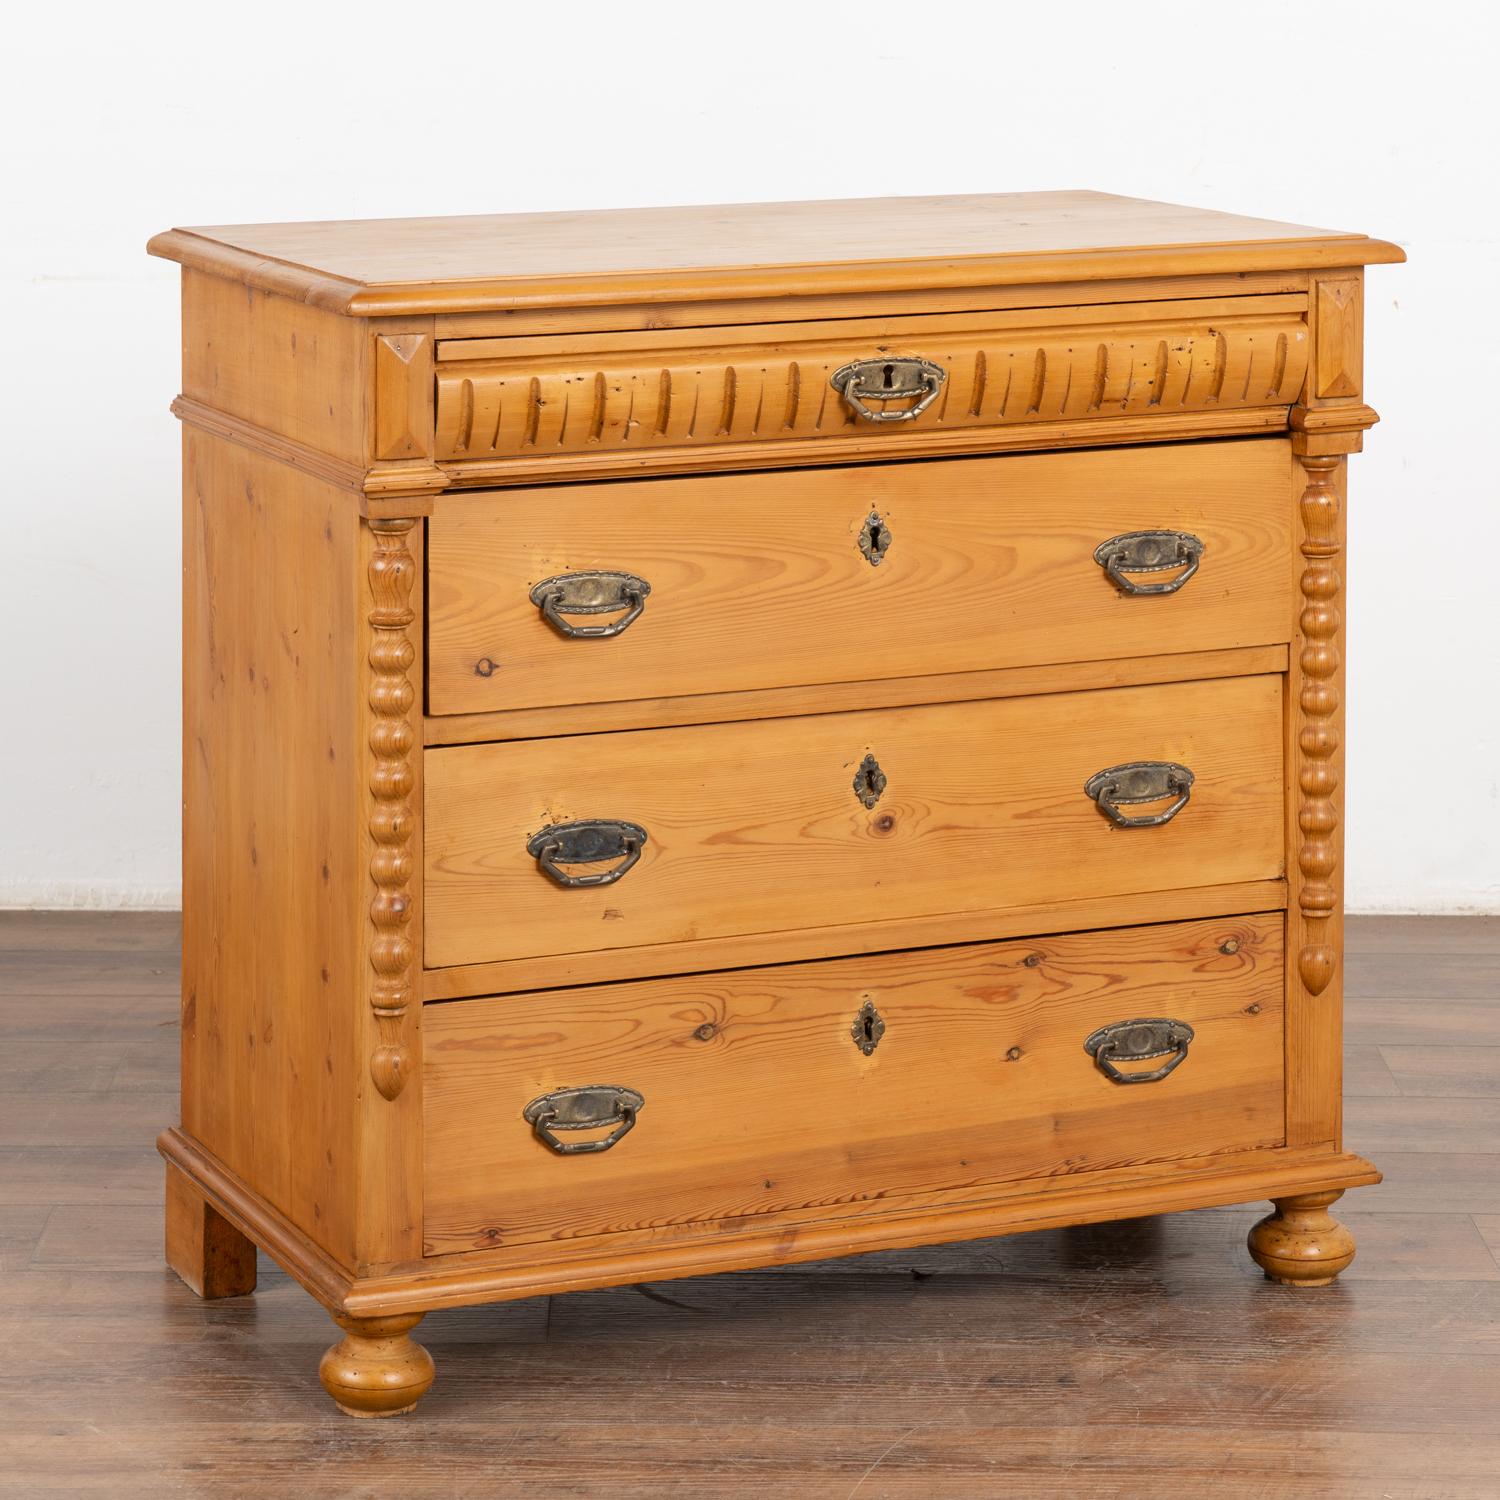 Antique pine chest of four drawers resting on bun feet.
Traditional half column detail, simple carved top drawer, dove-tail joints and brass pulls.
Note the natural wax finish that brings out the warmth of the pine. 
Restored, this nightstand is